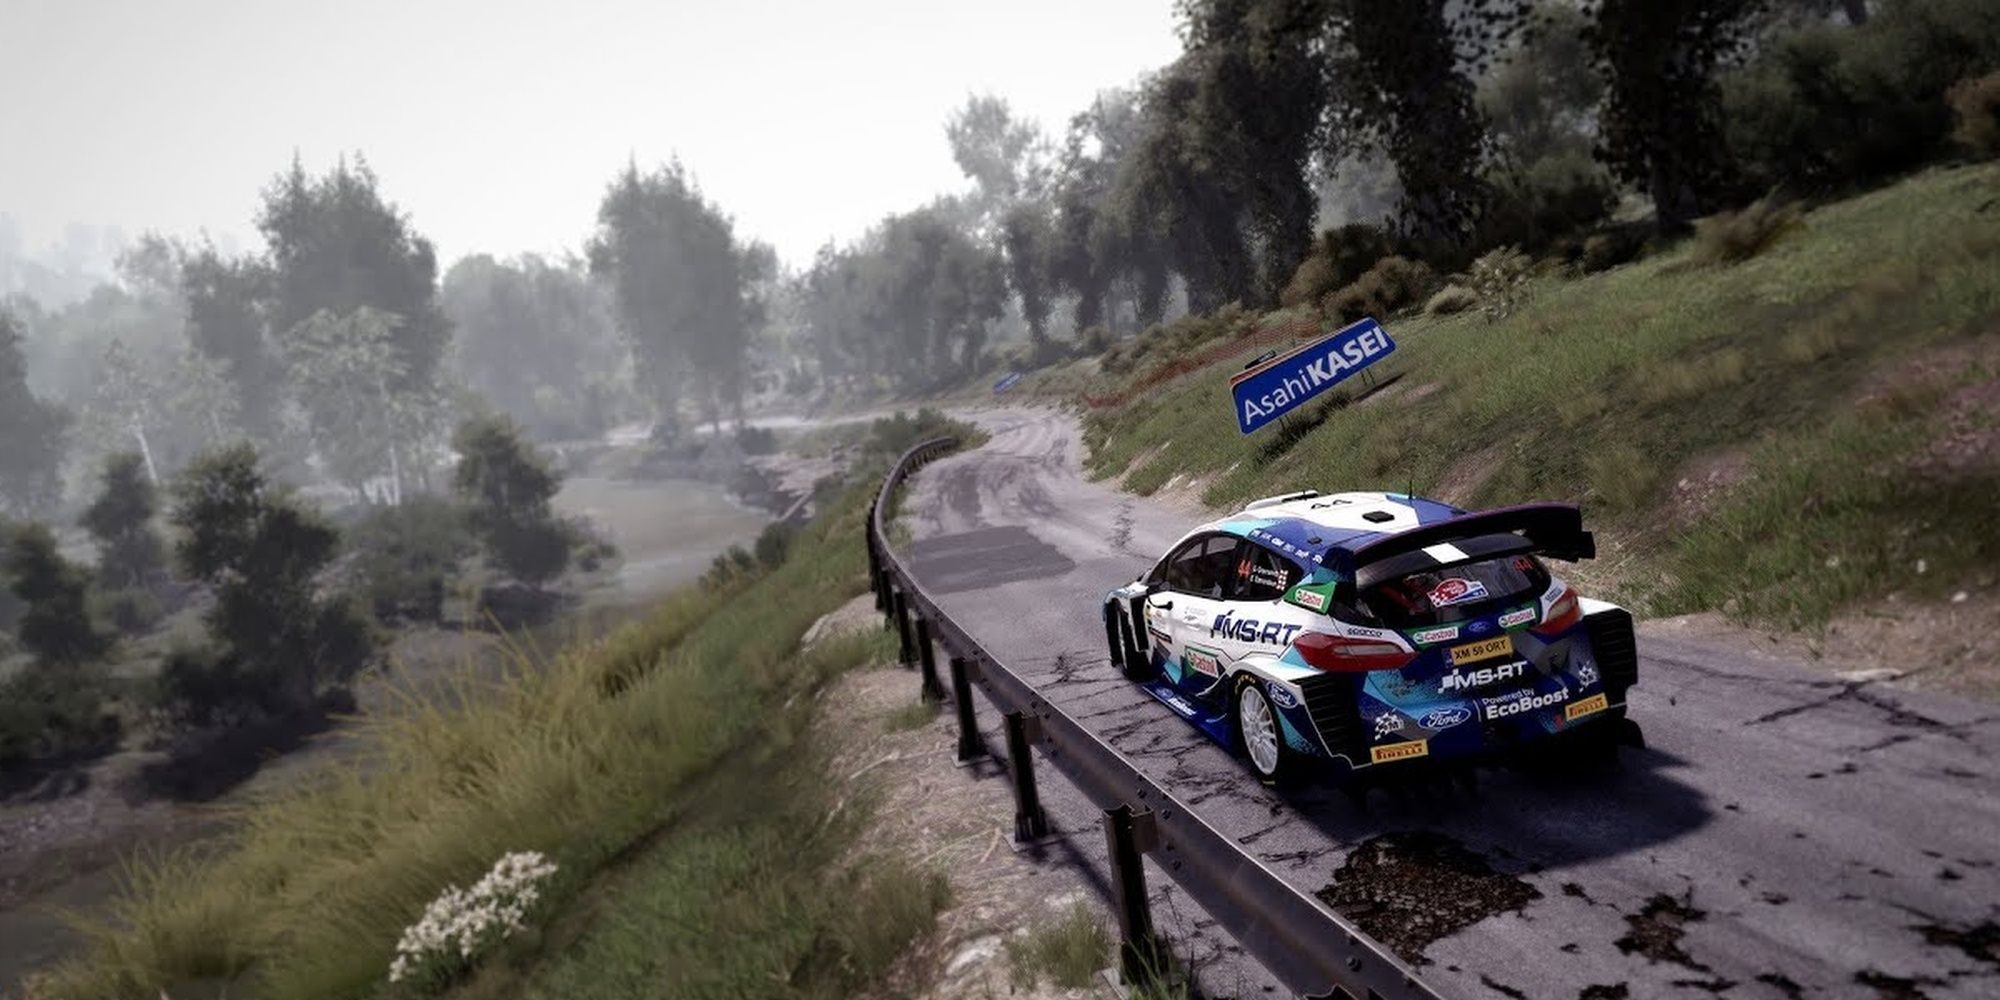 wrc-10-career-mode-has-a-lot-of-events-cropped-9781721